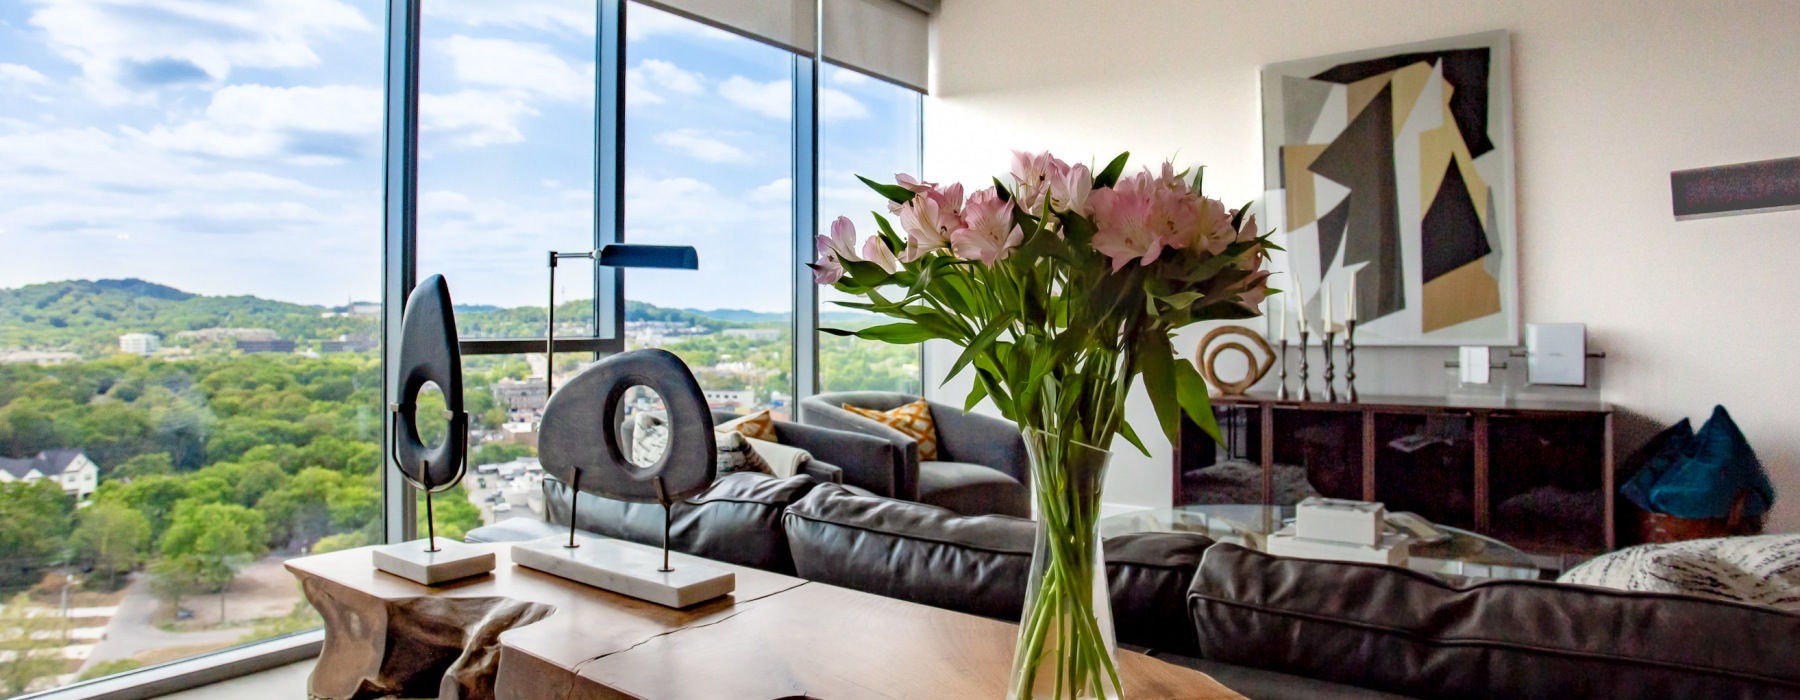 Penthouse living room with view of rolling green hills and vase of flowers